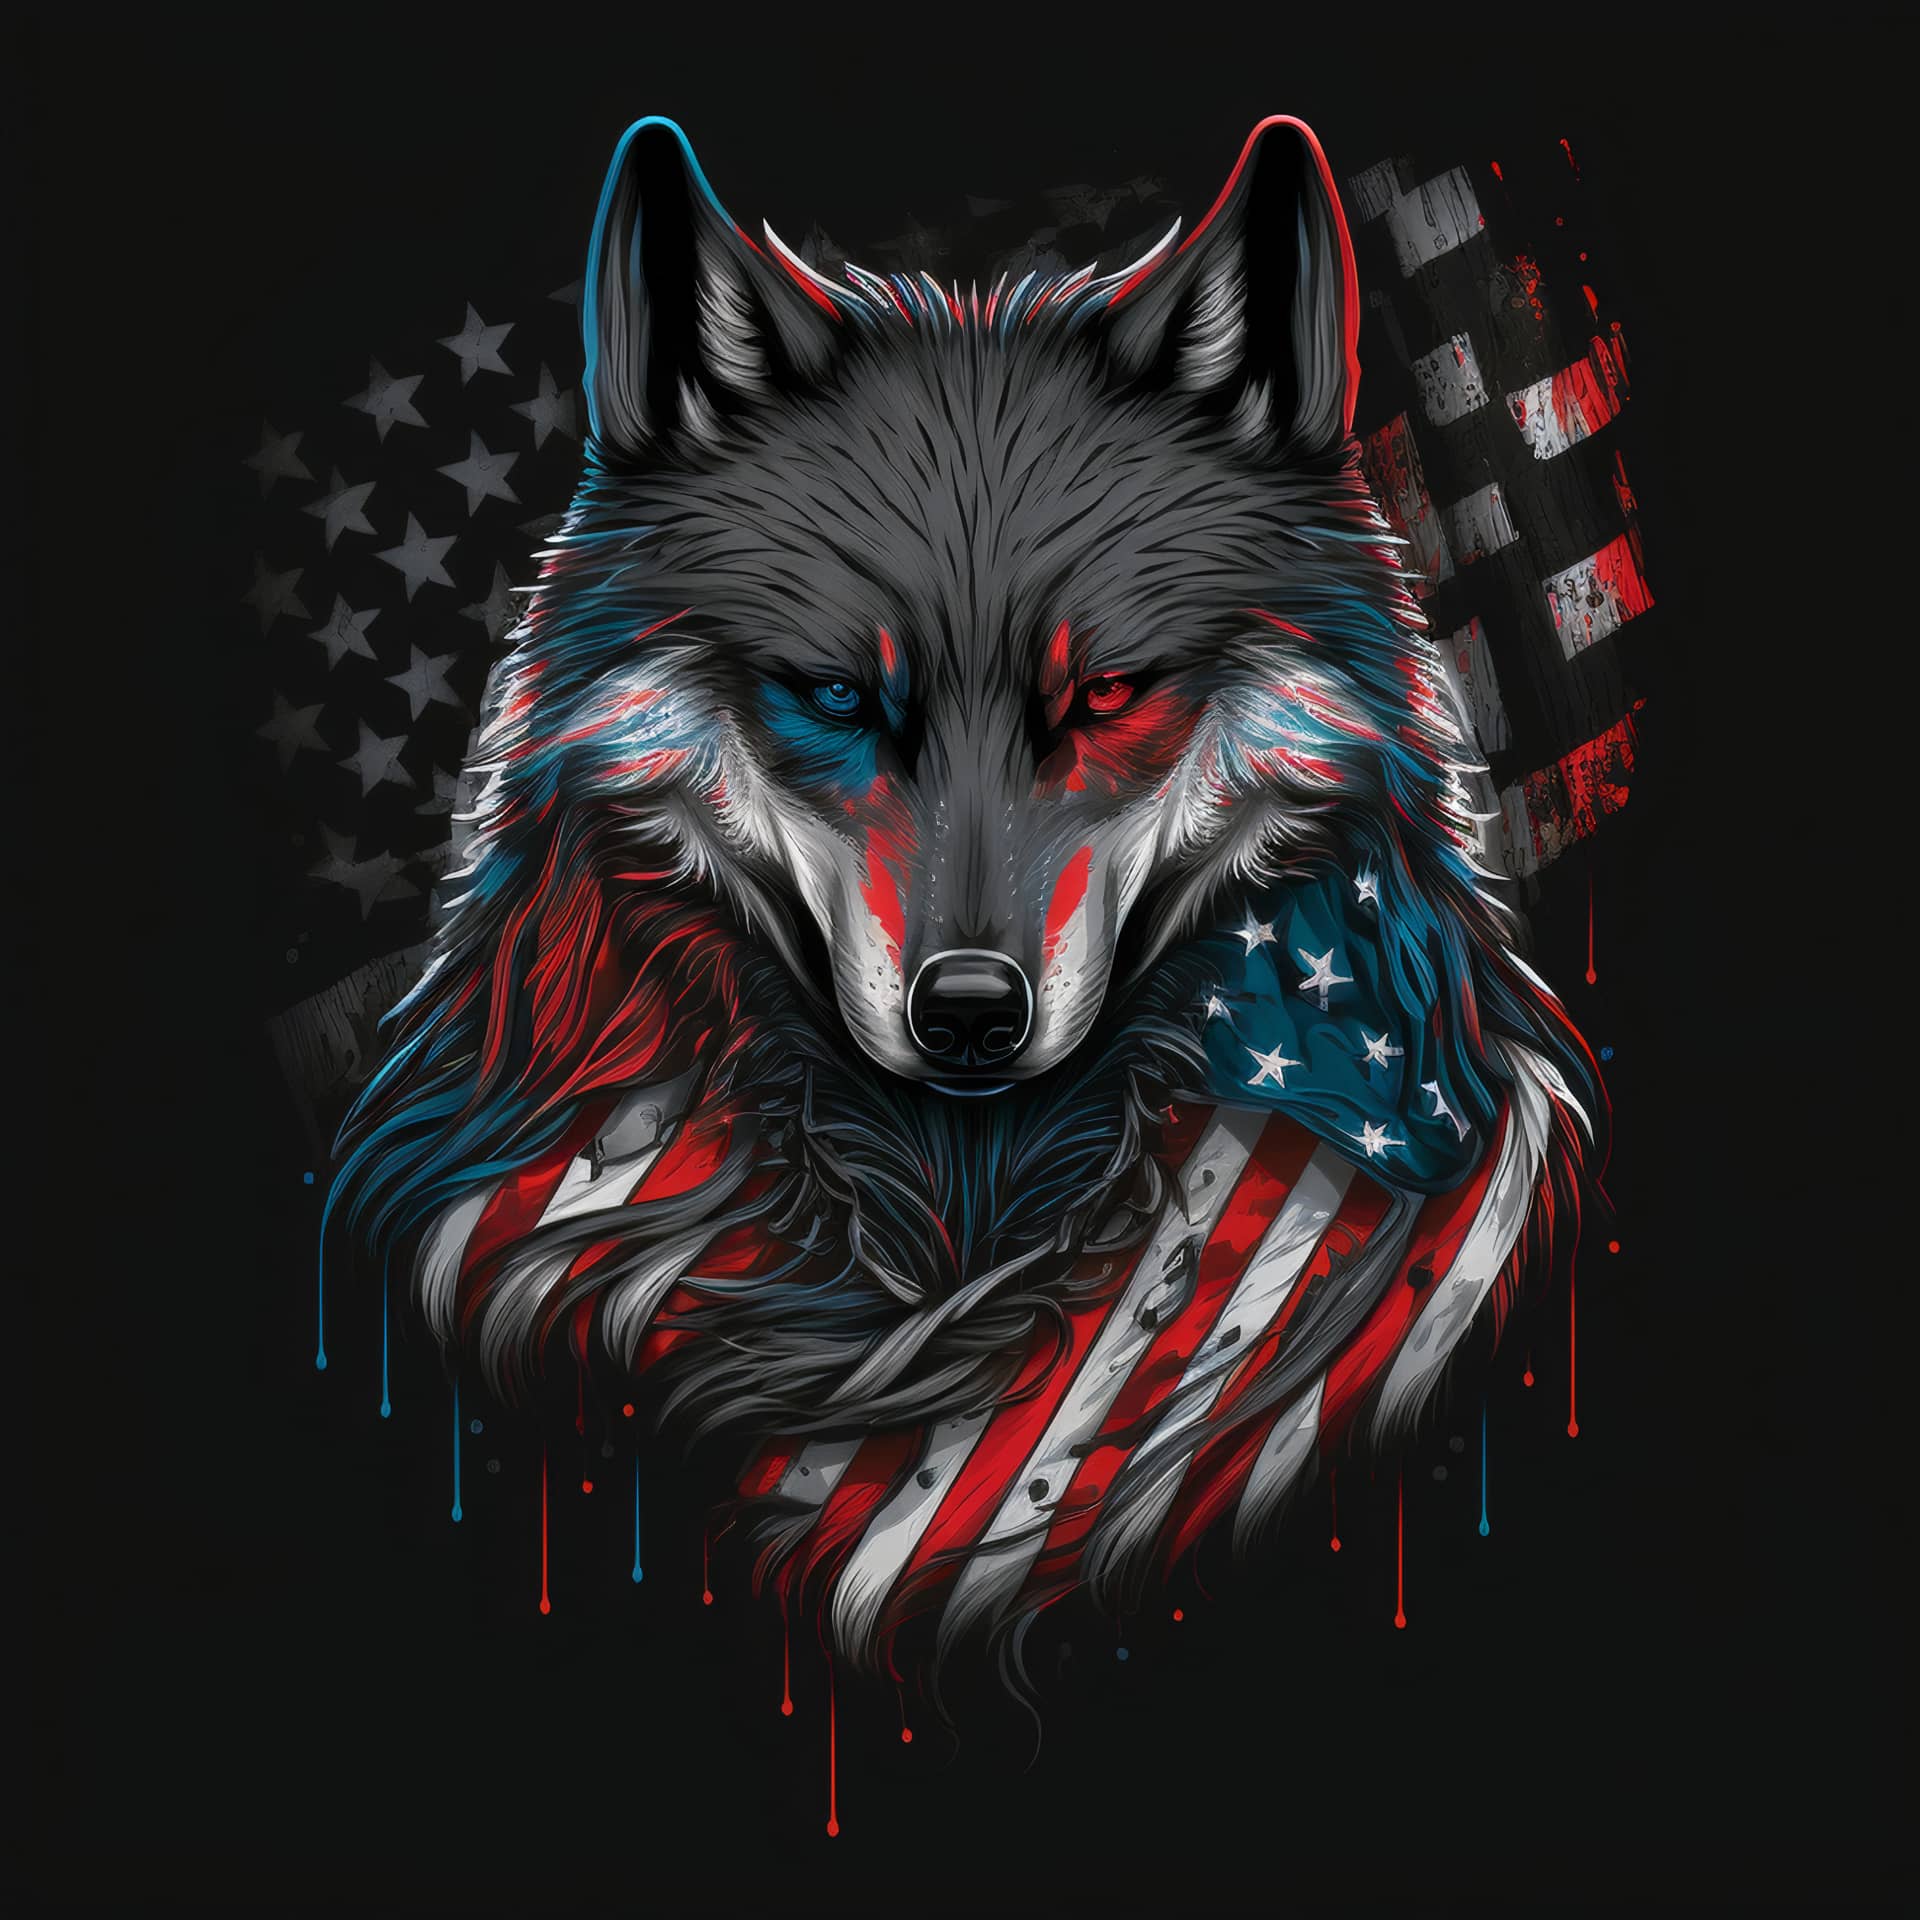 Wolf design with american flag image